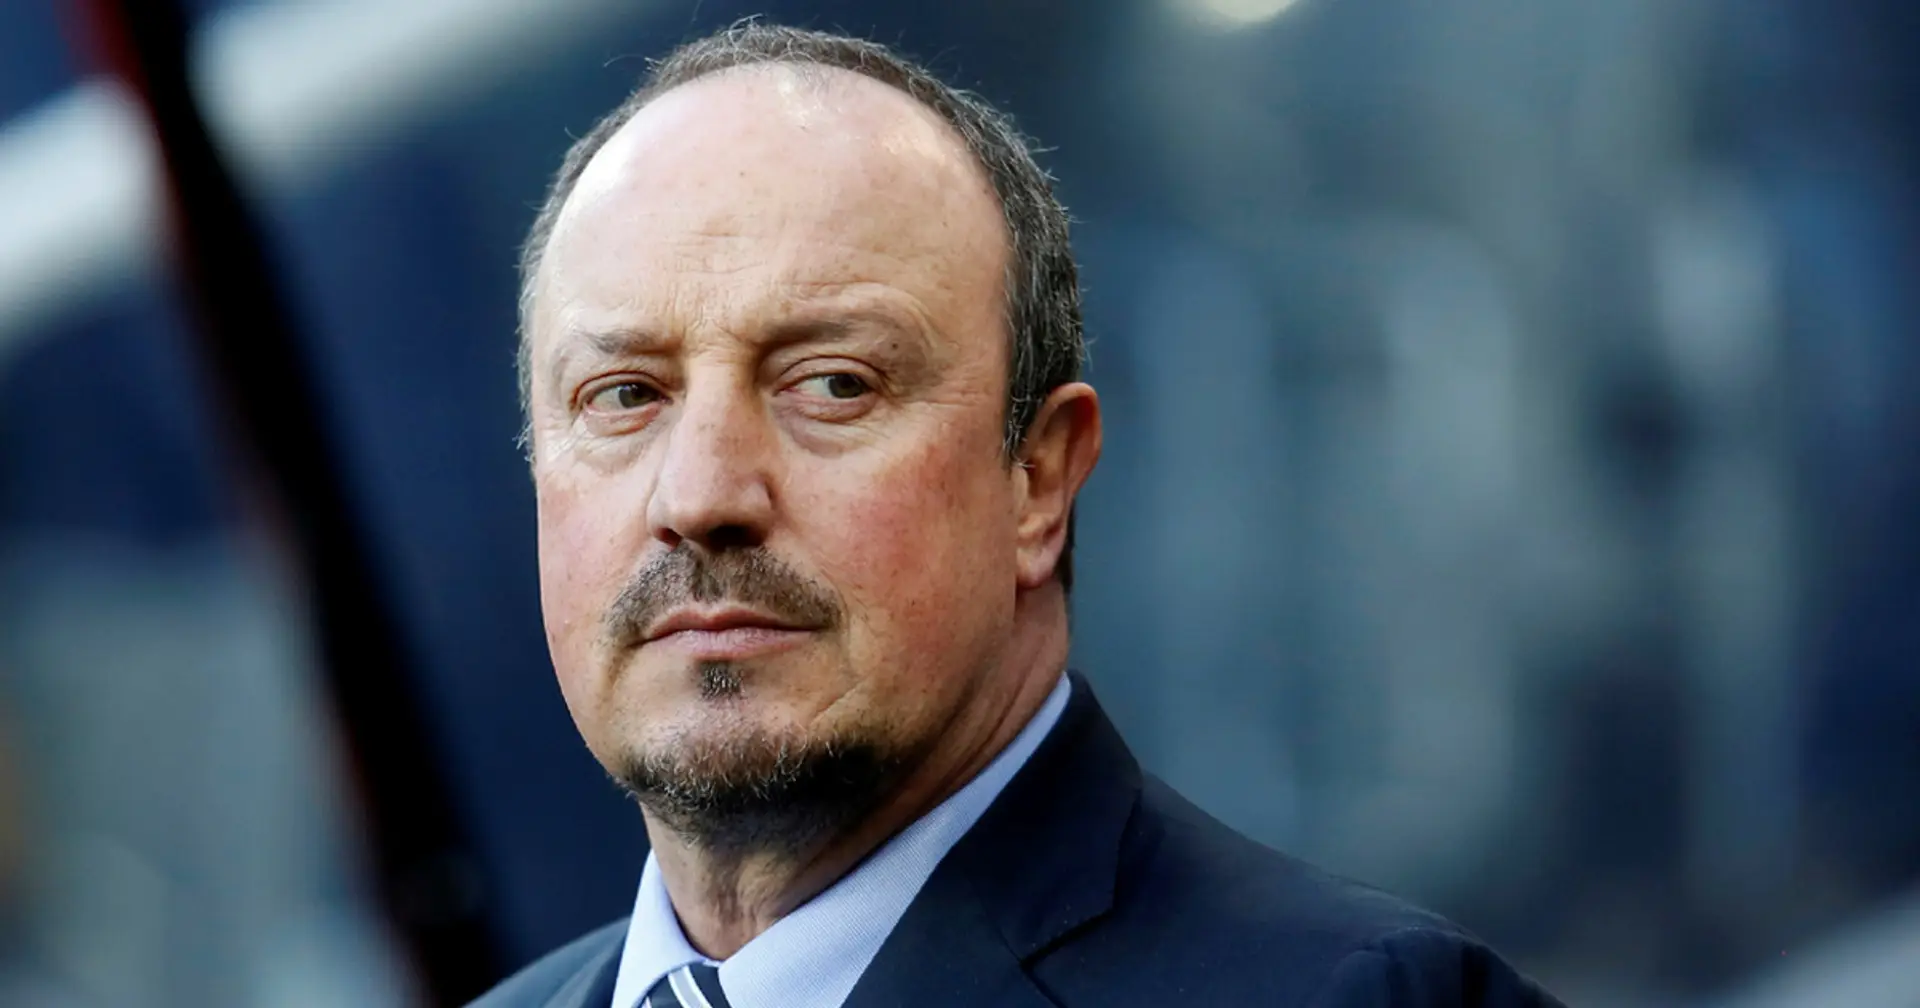 'Chelsea & Man United must deliver. They have spent some money in recent years': former Liverpool boss Benitez